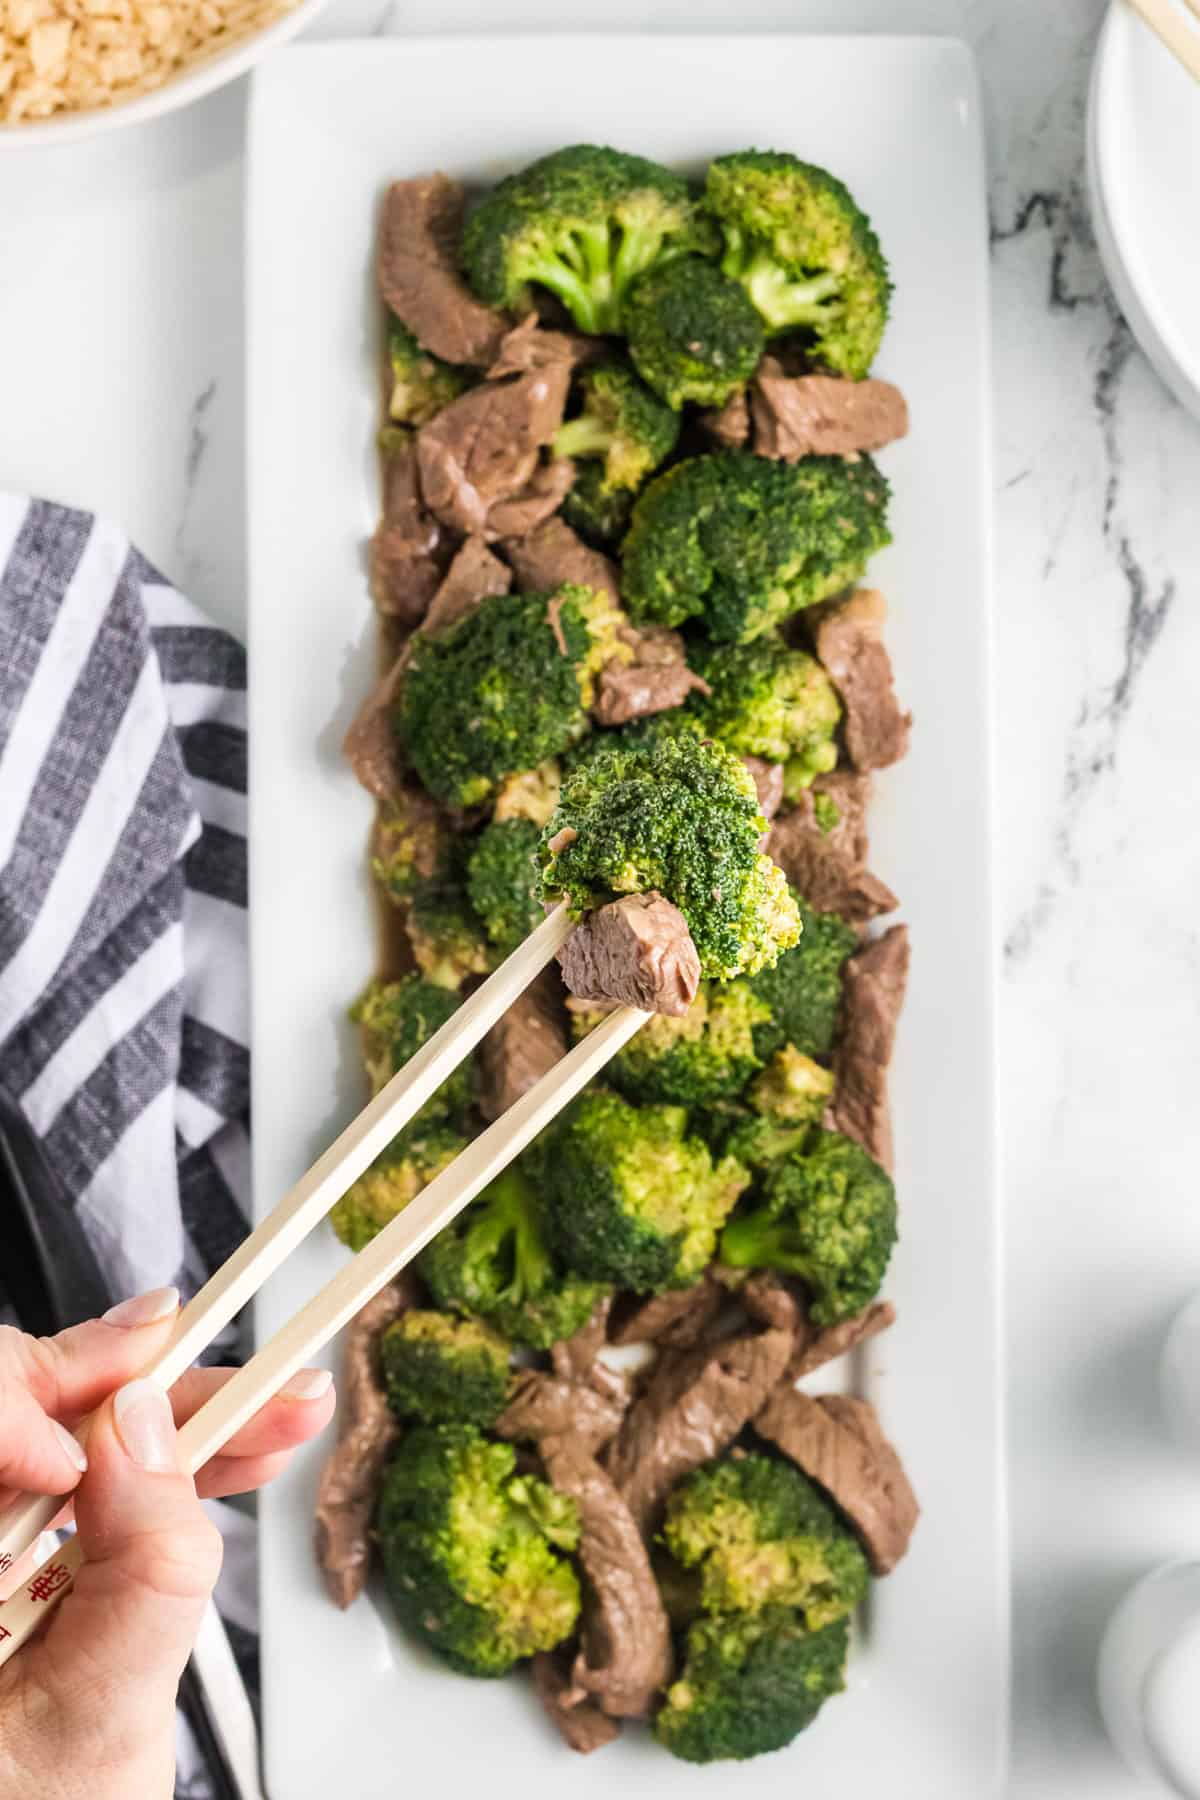 A rectangular serving plate of beef and broccoli with a hand holding chopsticks.